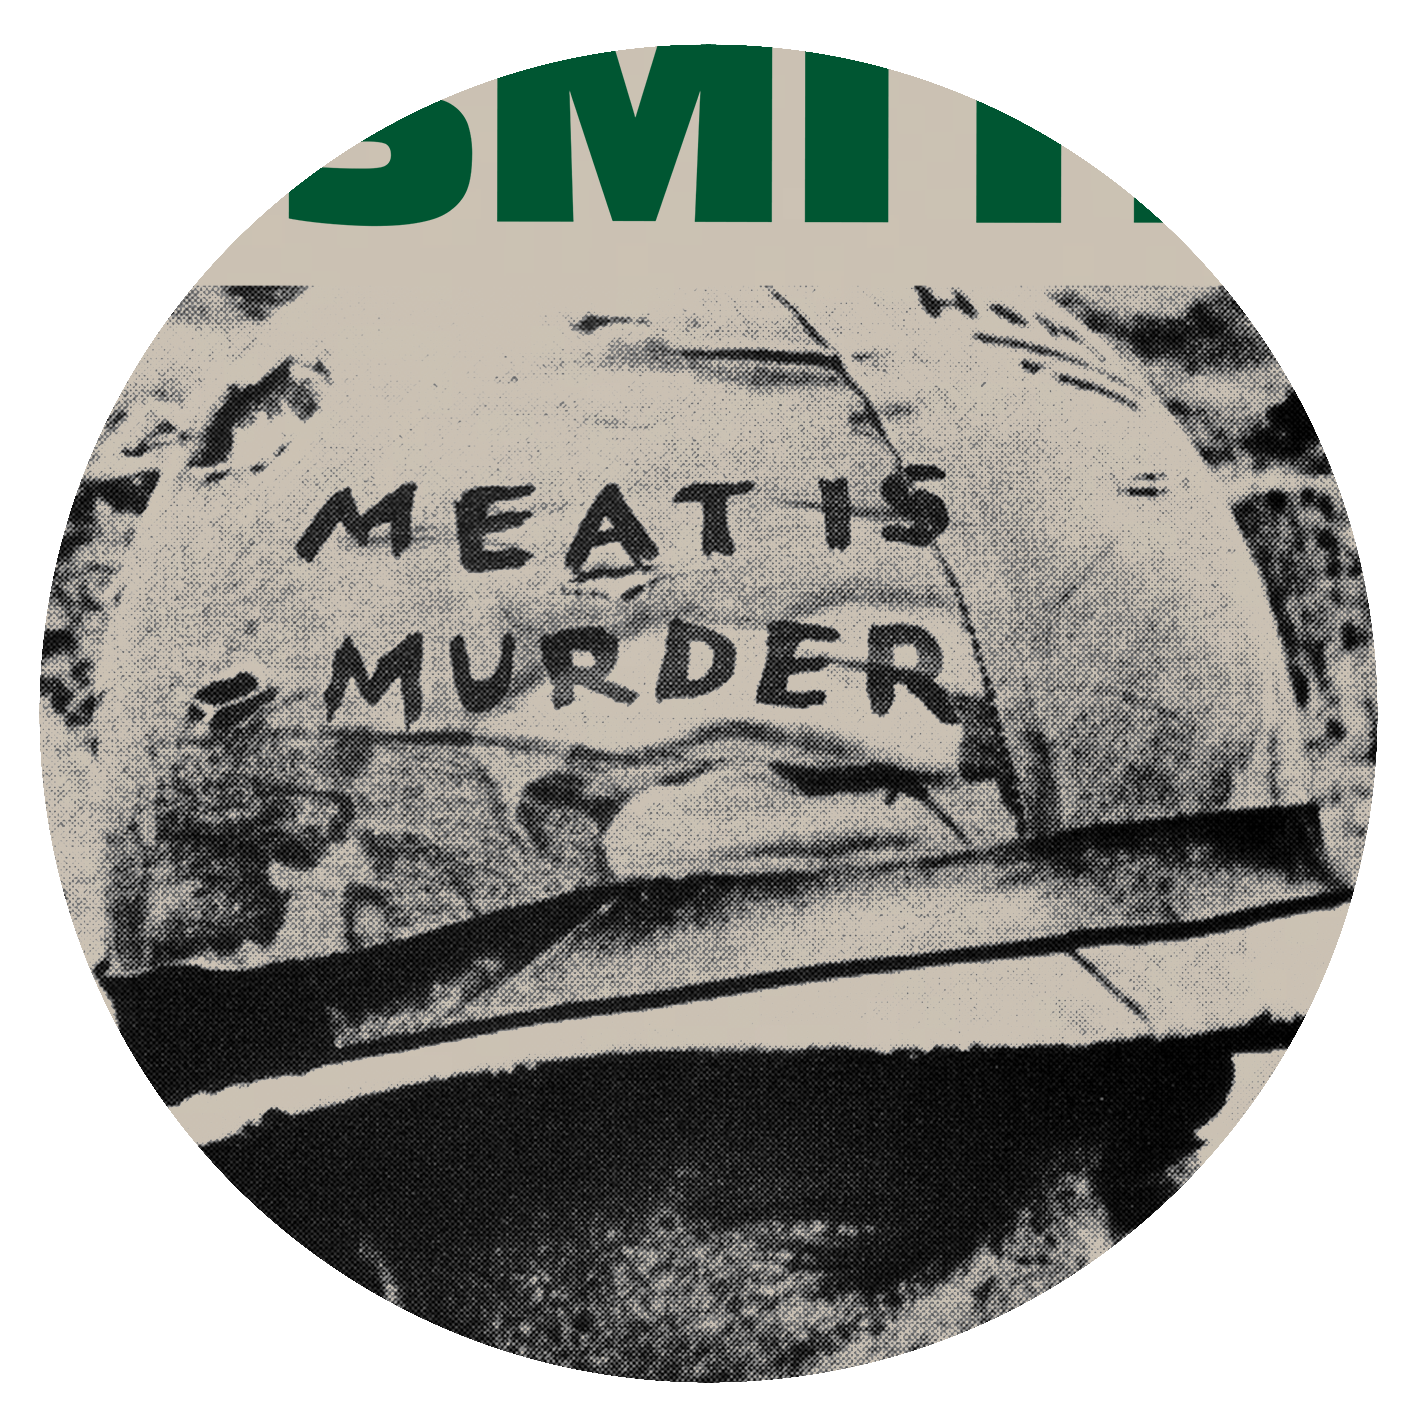 THE SMITHS - Meat Is Murder - 1985 - Full Image